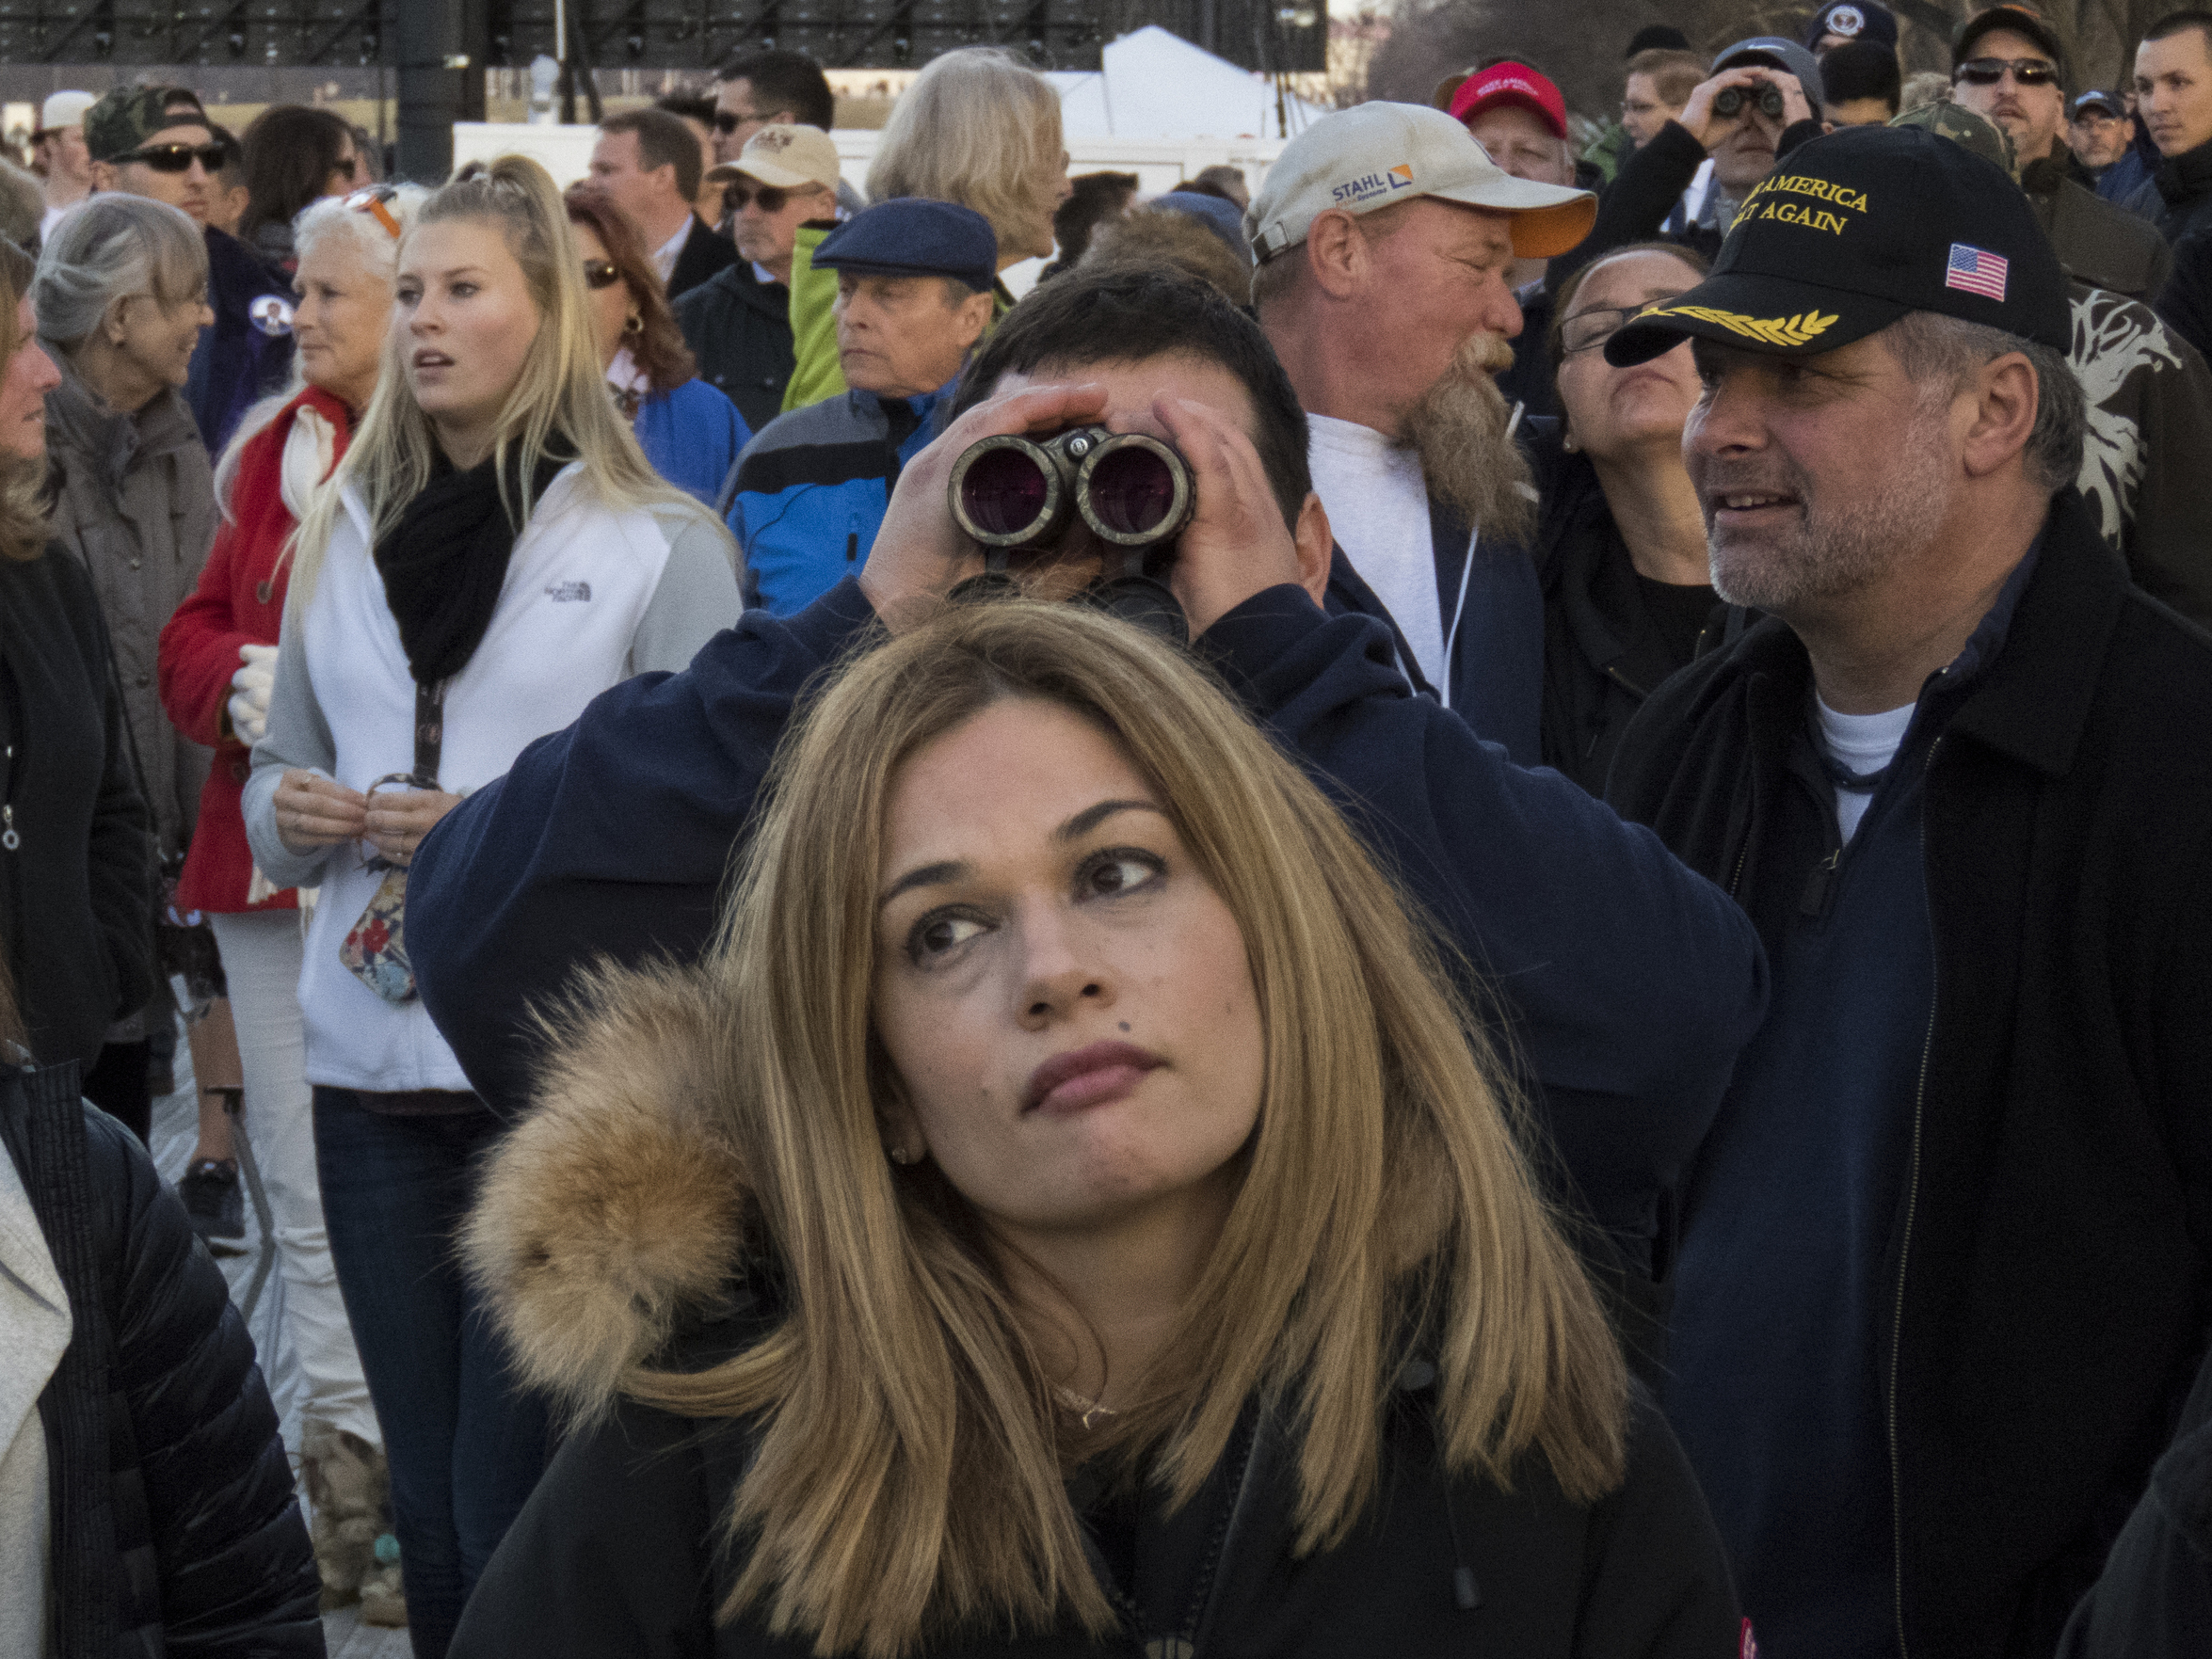 2017. Washington, DC. USA.  Attendees at the Voices of the People: Make America Great Again Welcome Concert at the Lincoln Memorial.